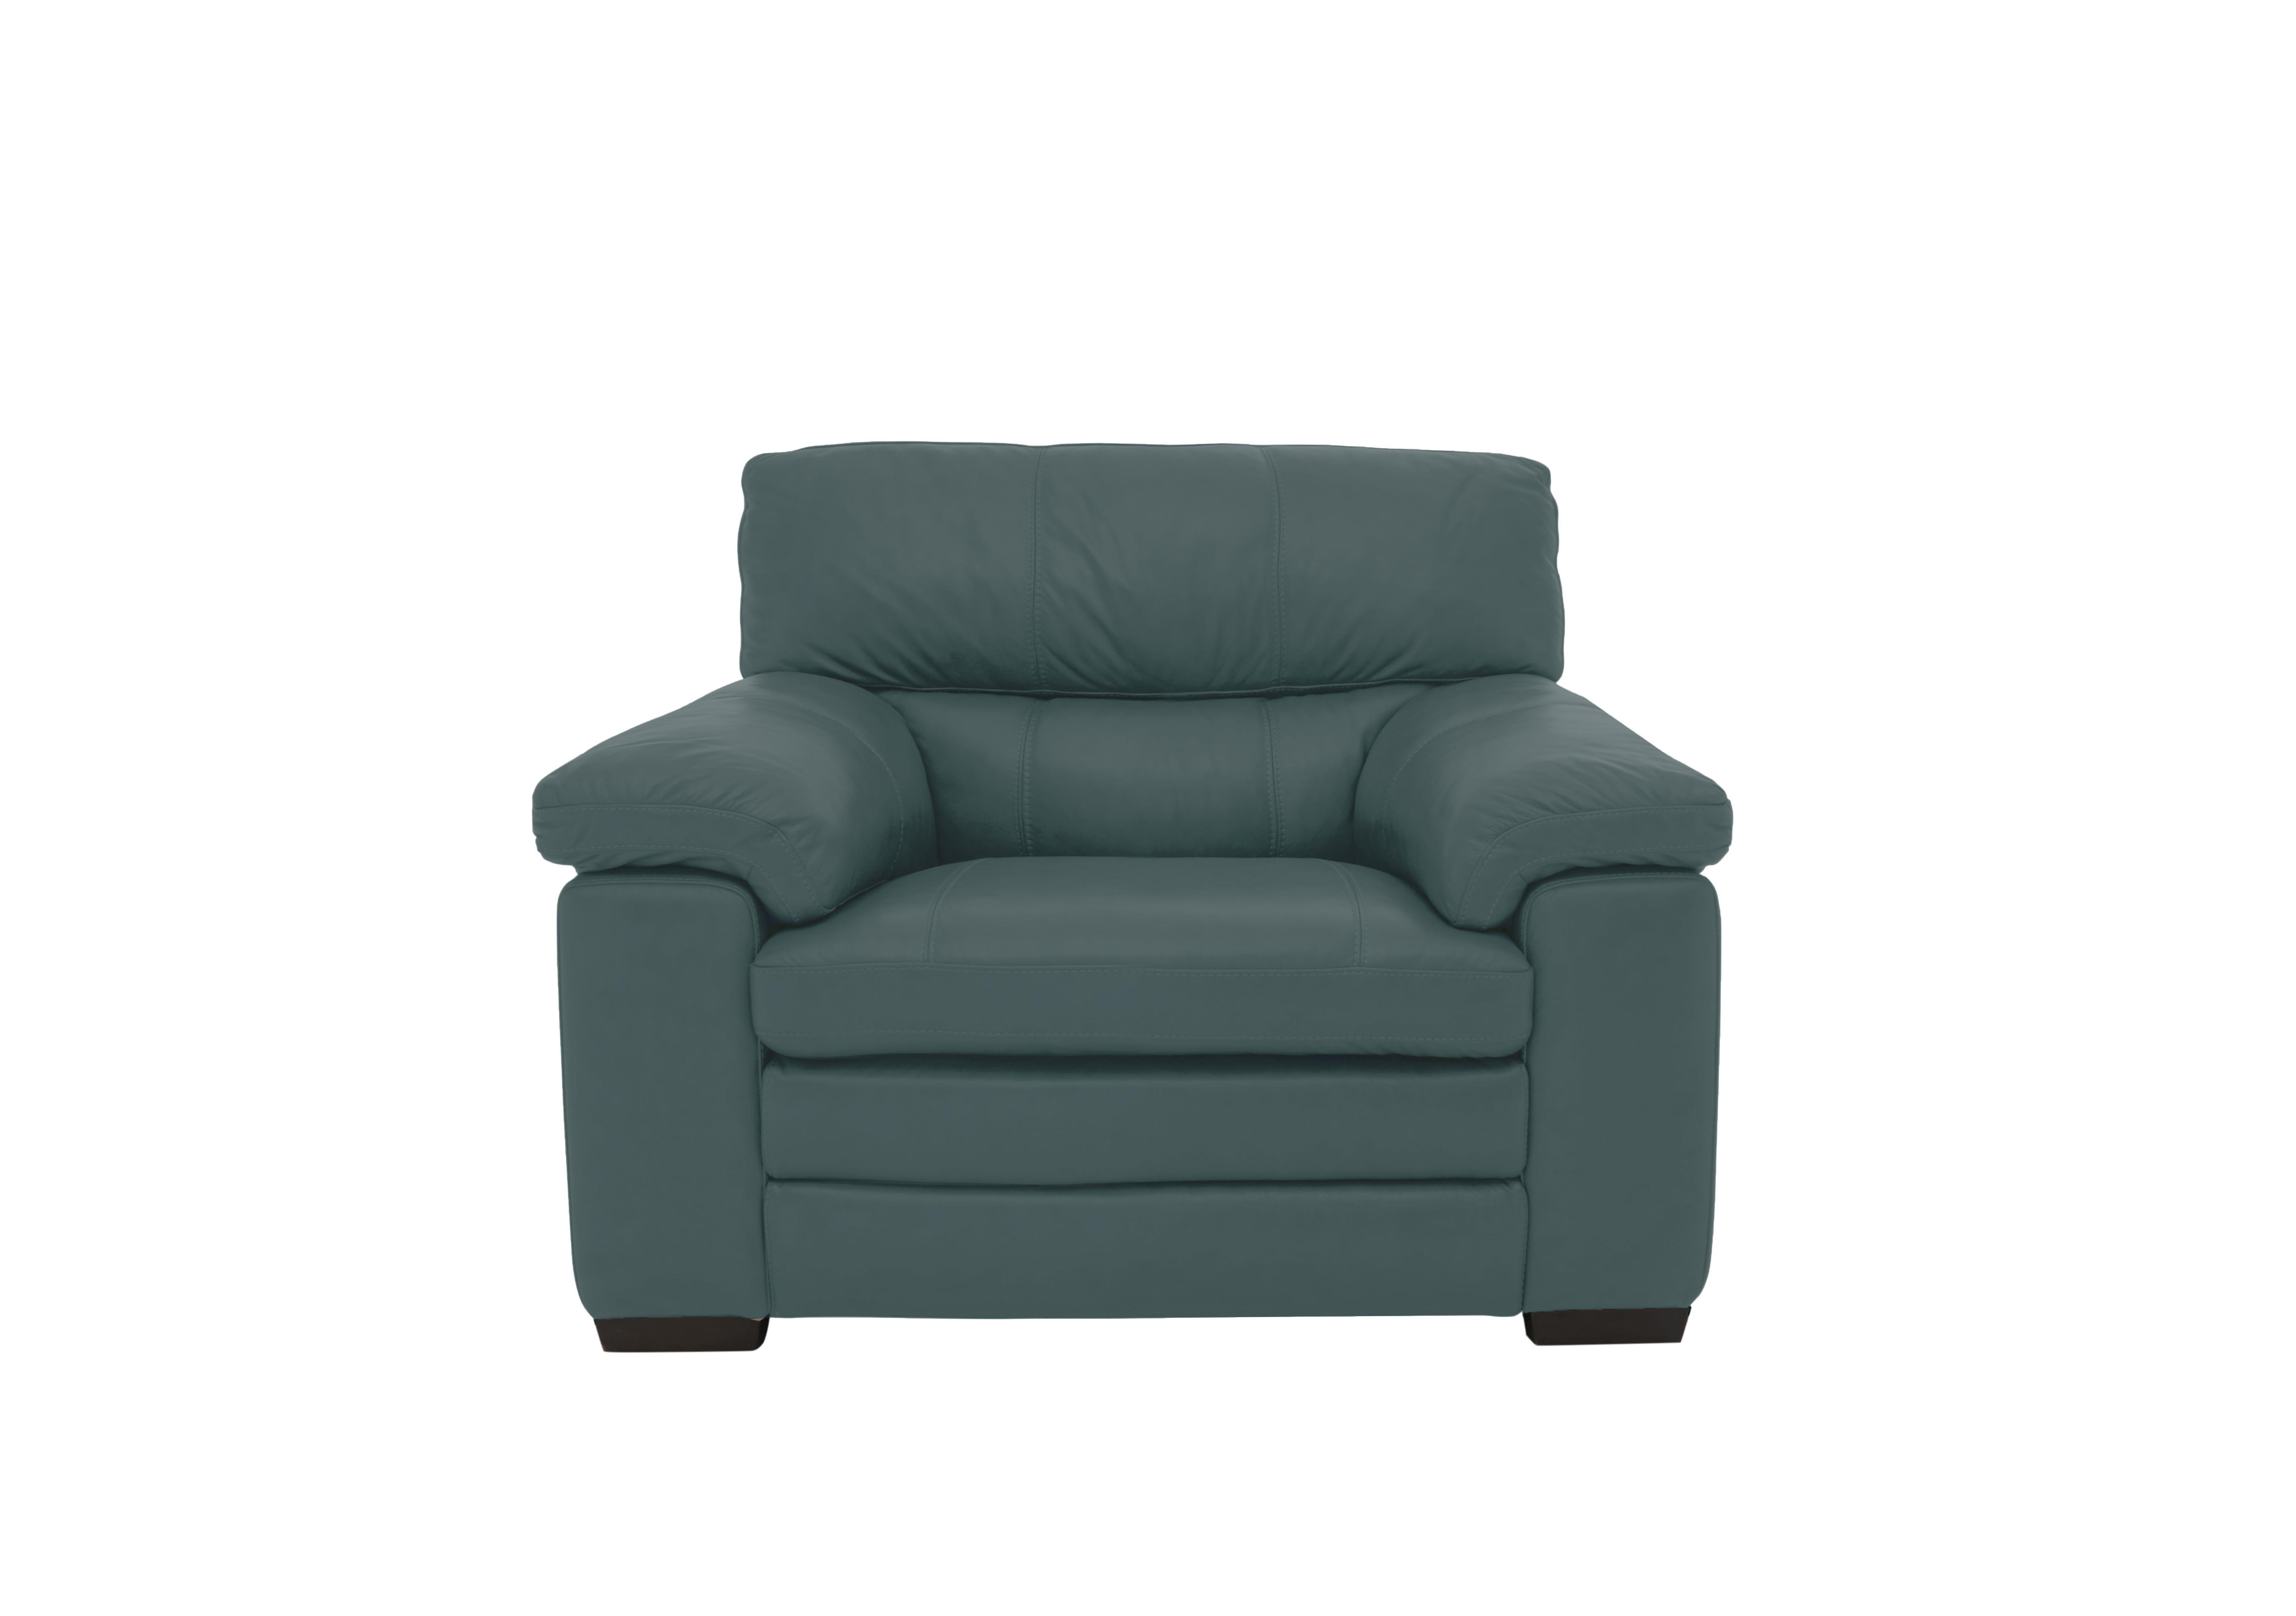 Cozee Leather Armchair in Bv-301e Lake Green on Furniture Village